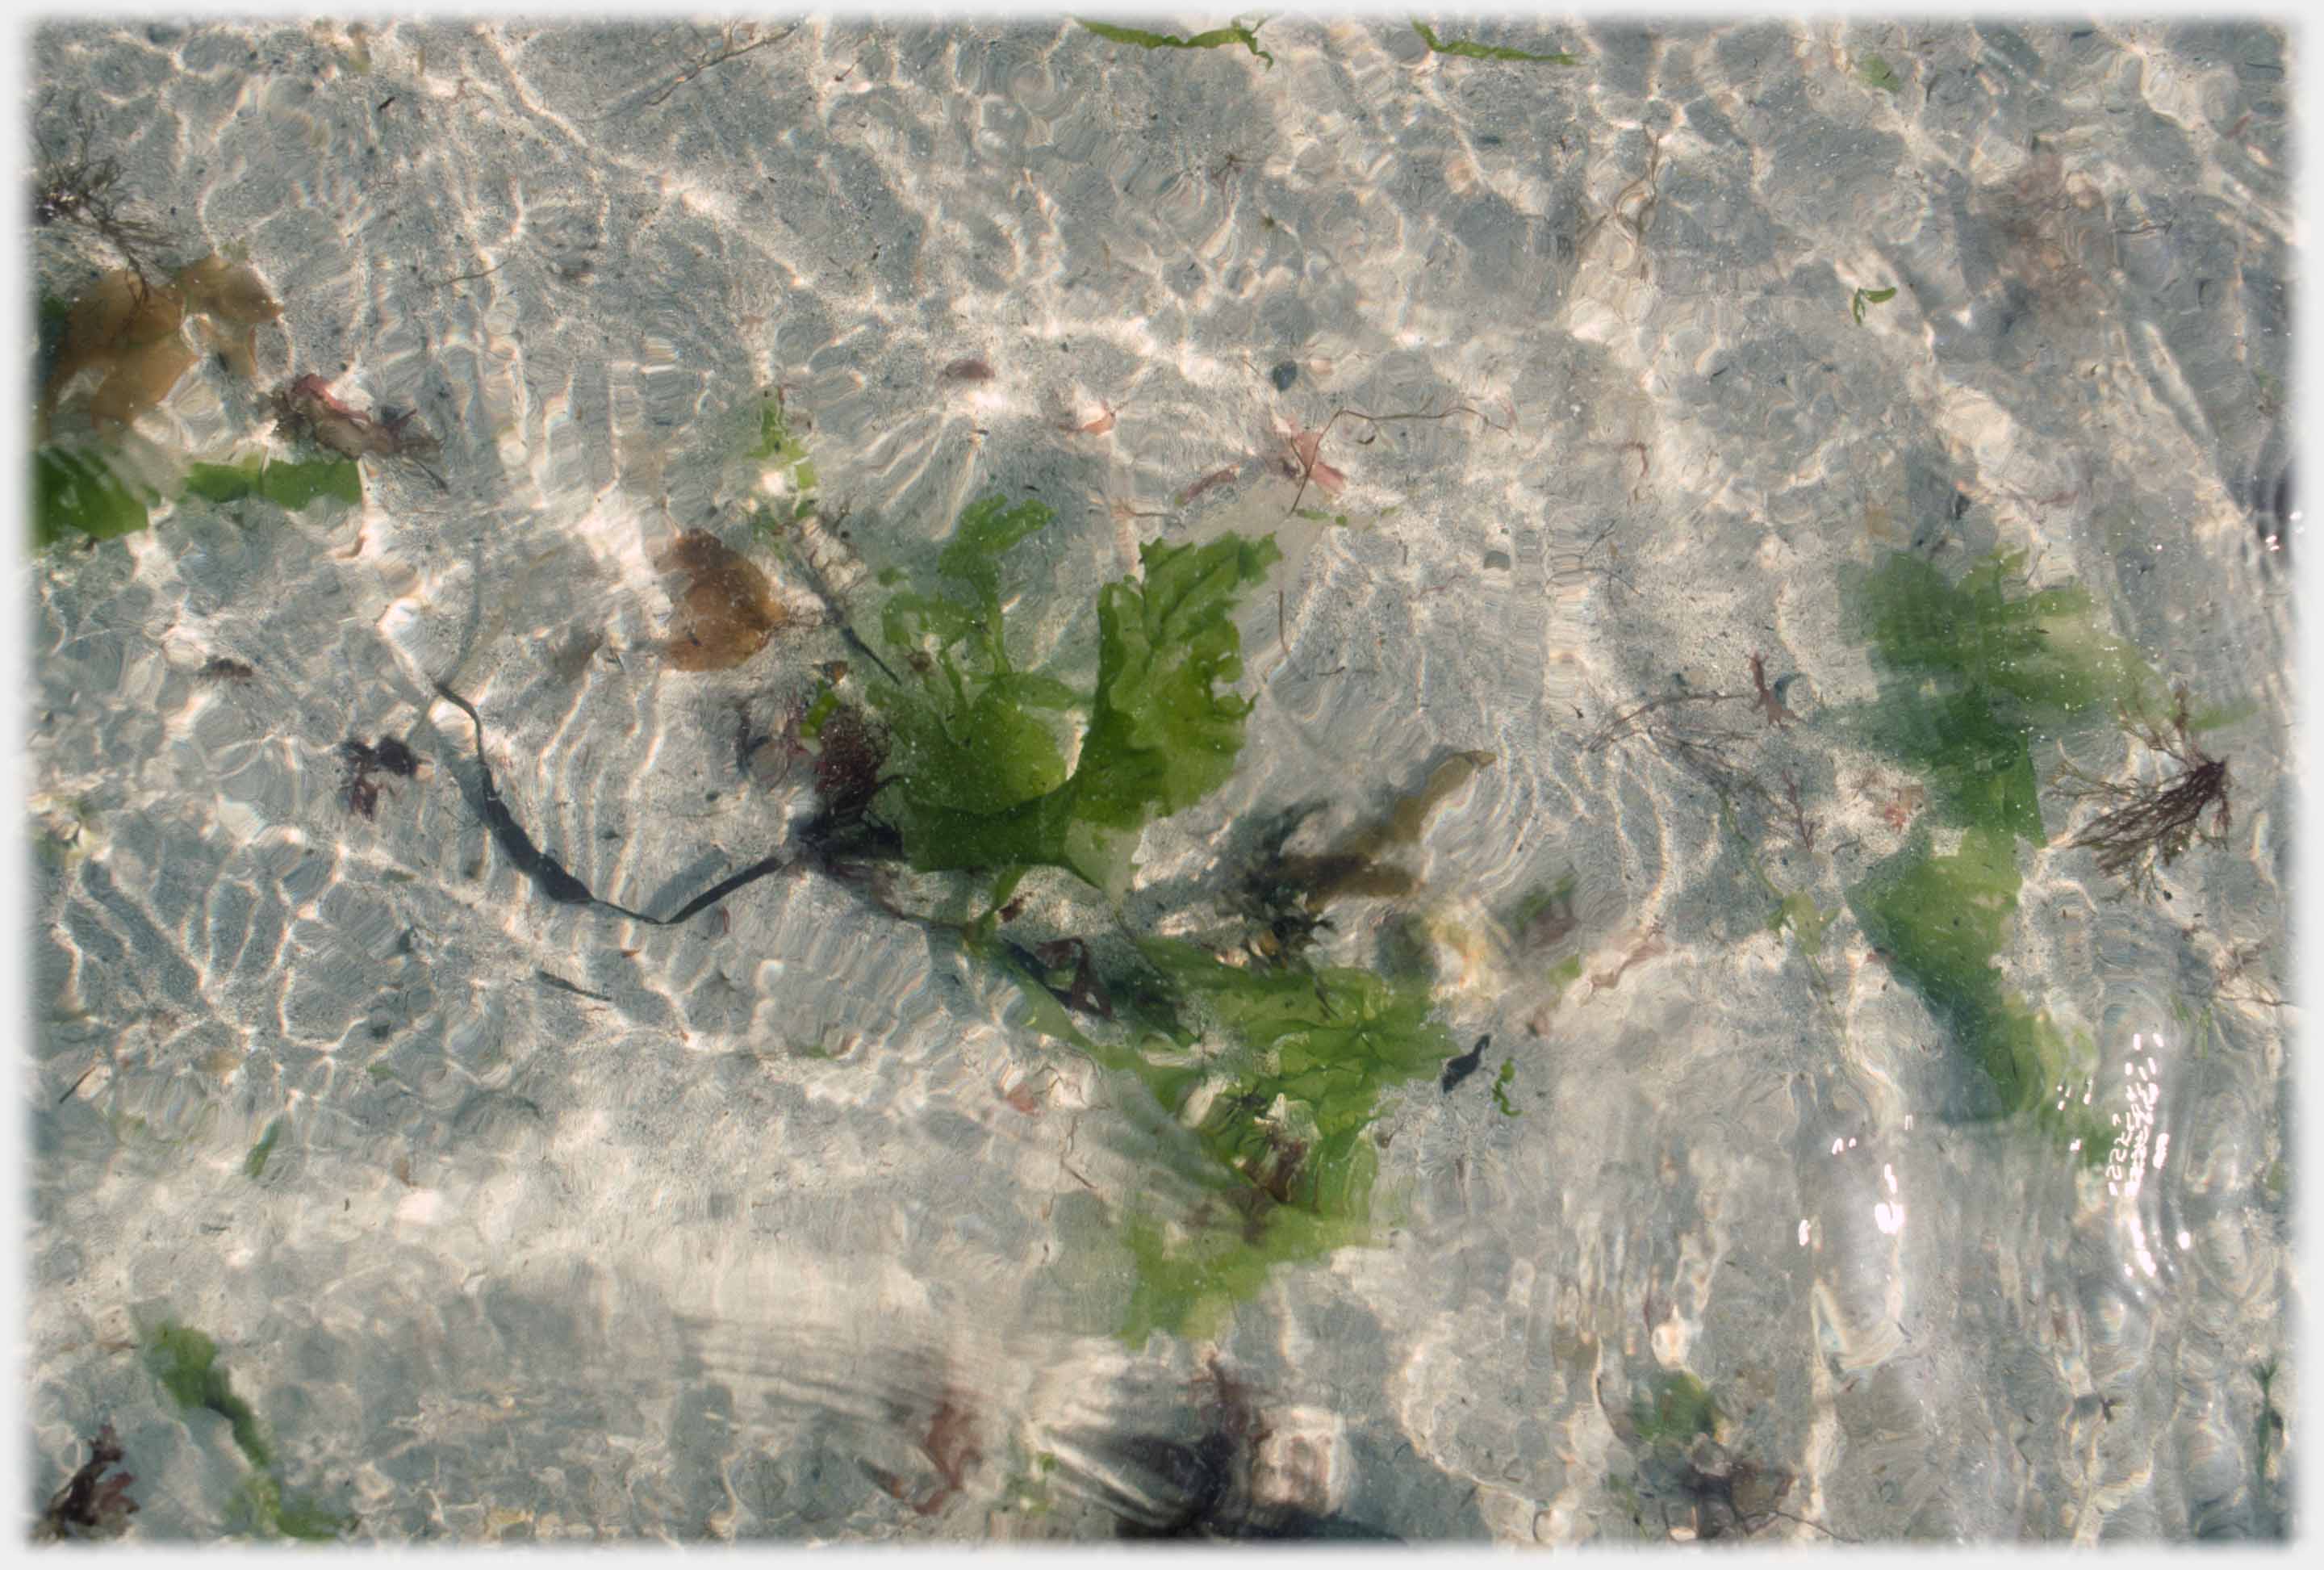 Looking into a sea pool with floating seaweed.